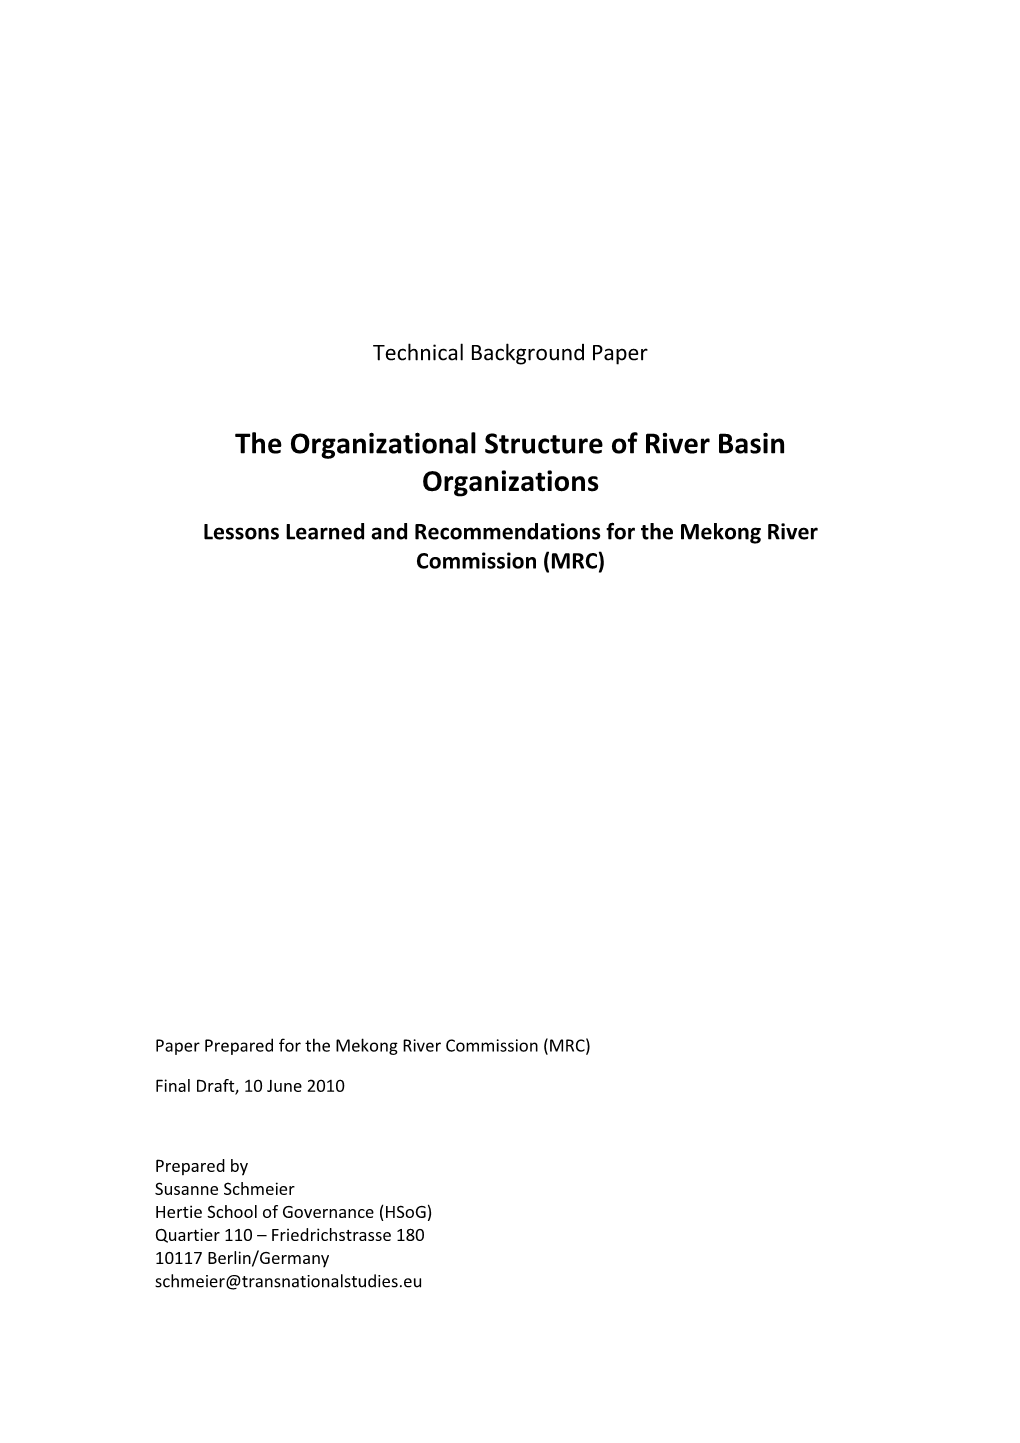 The Organizational Structure of River Basin Organizations Lessons Learned and Recommendations for the Mekong River Commission (MRC)